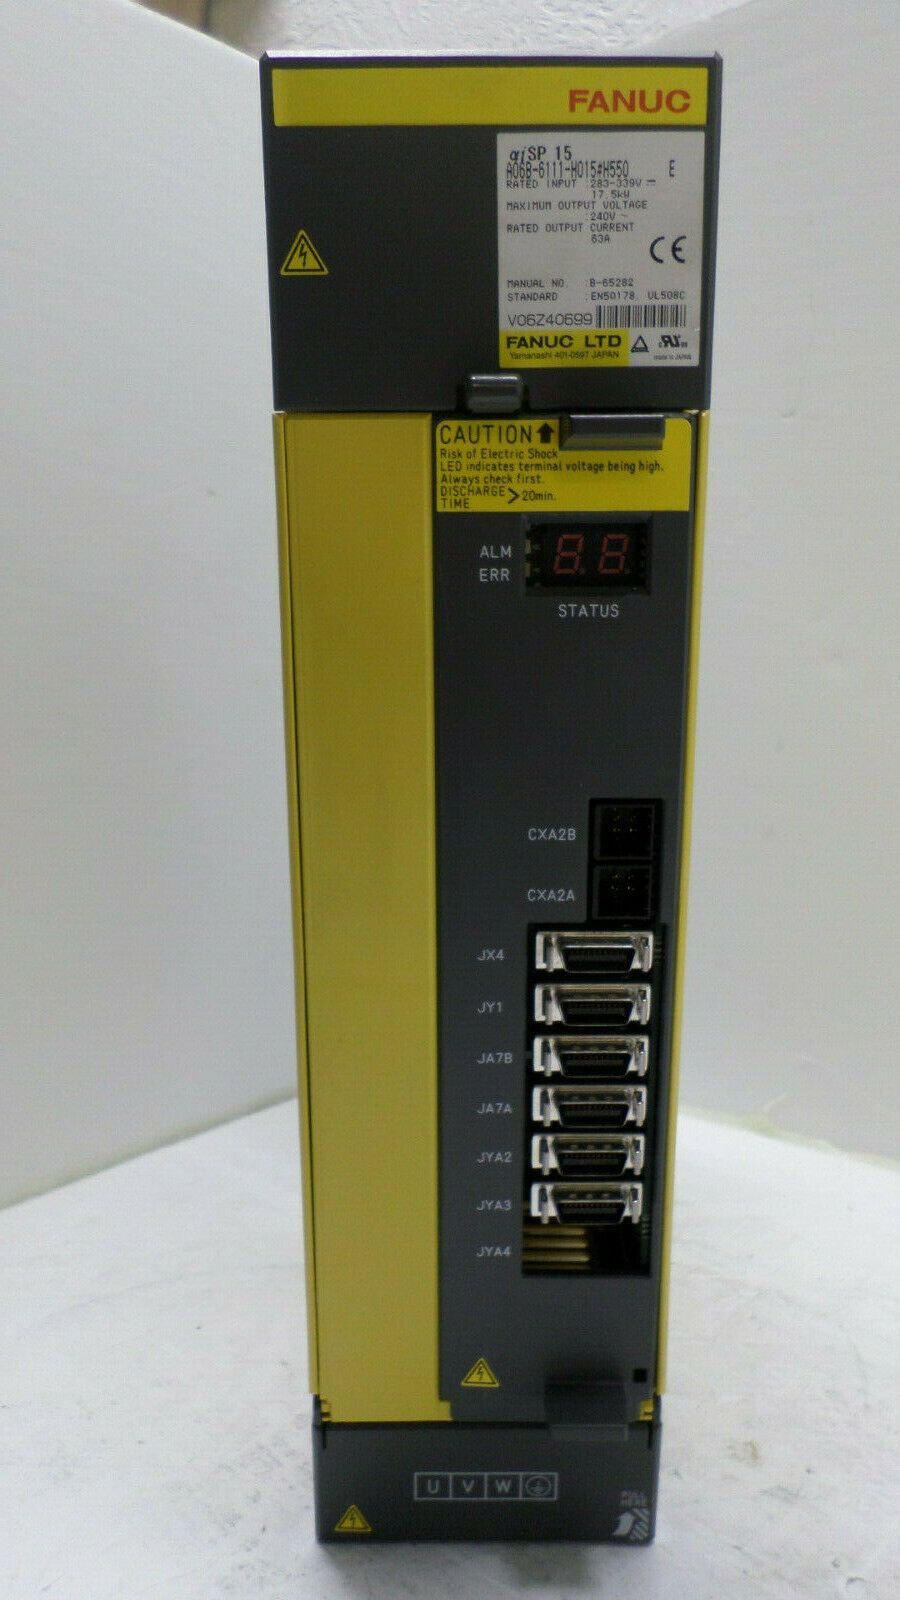 A06B-6111-H015 KOEED 500+, 70%, Fanuc, import_2020_10_10_031751, Other